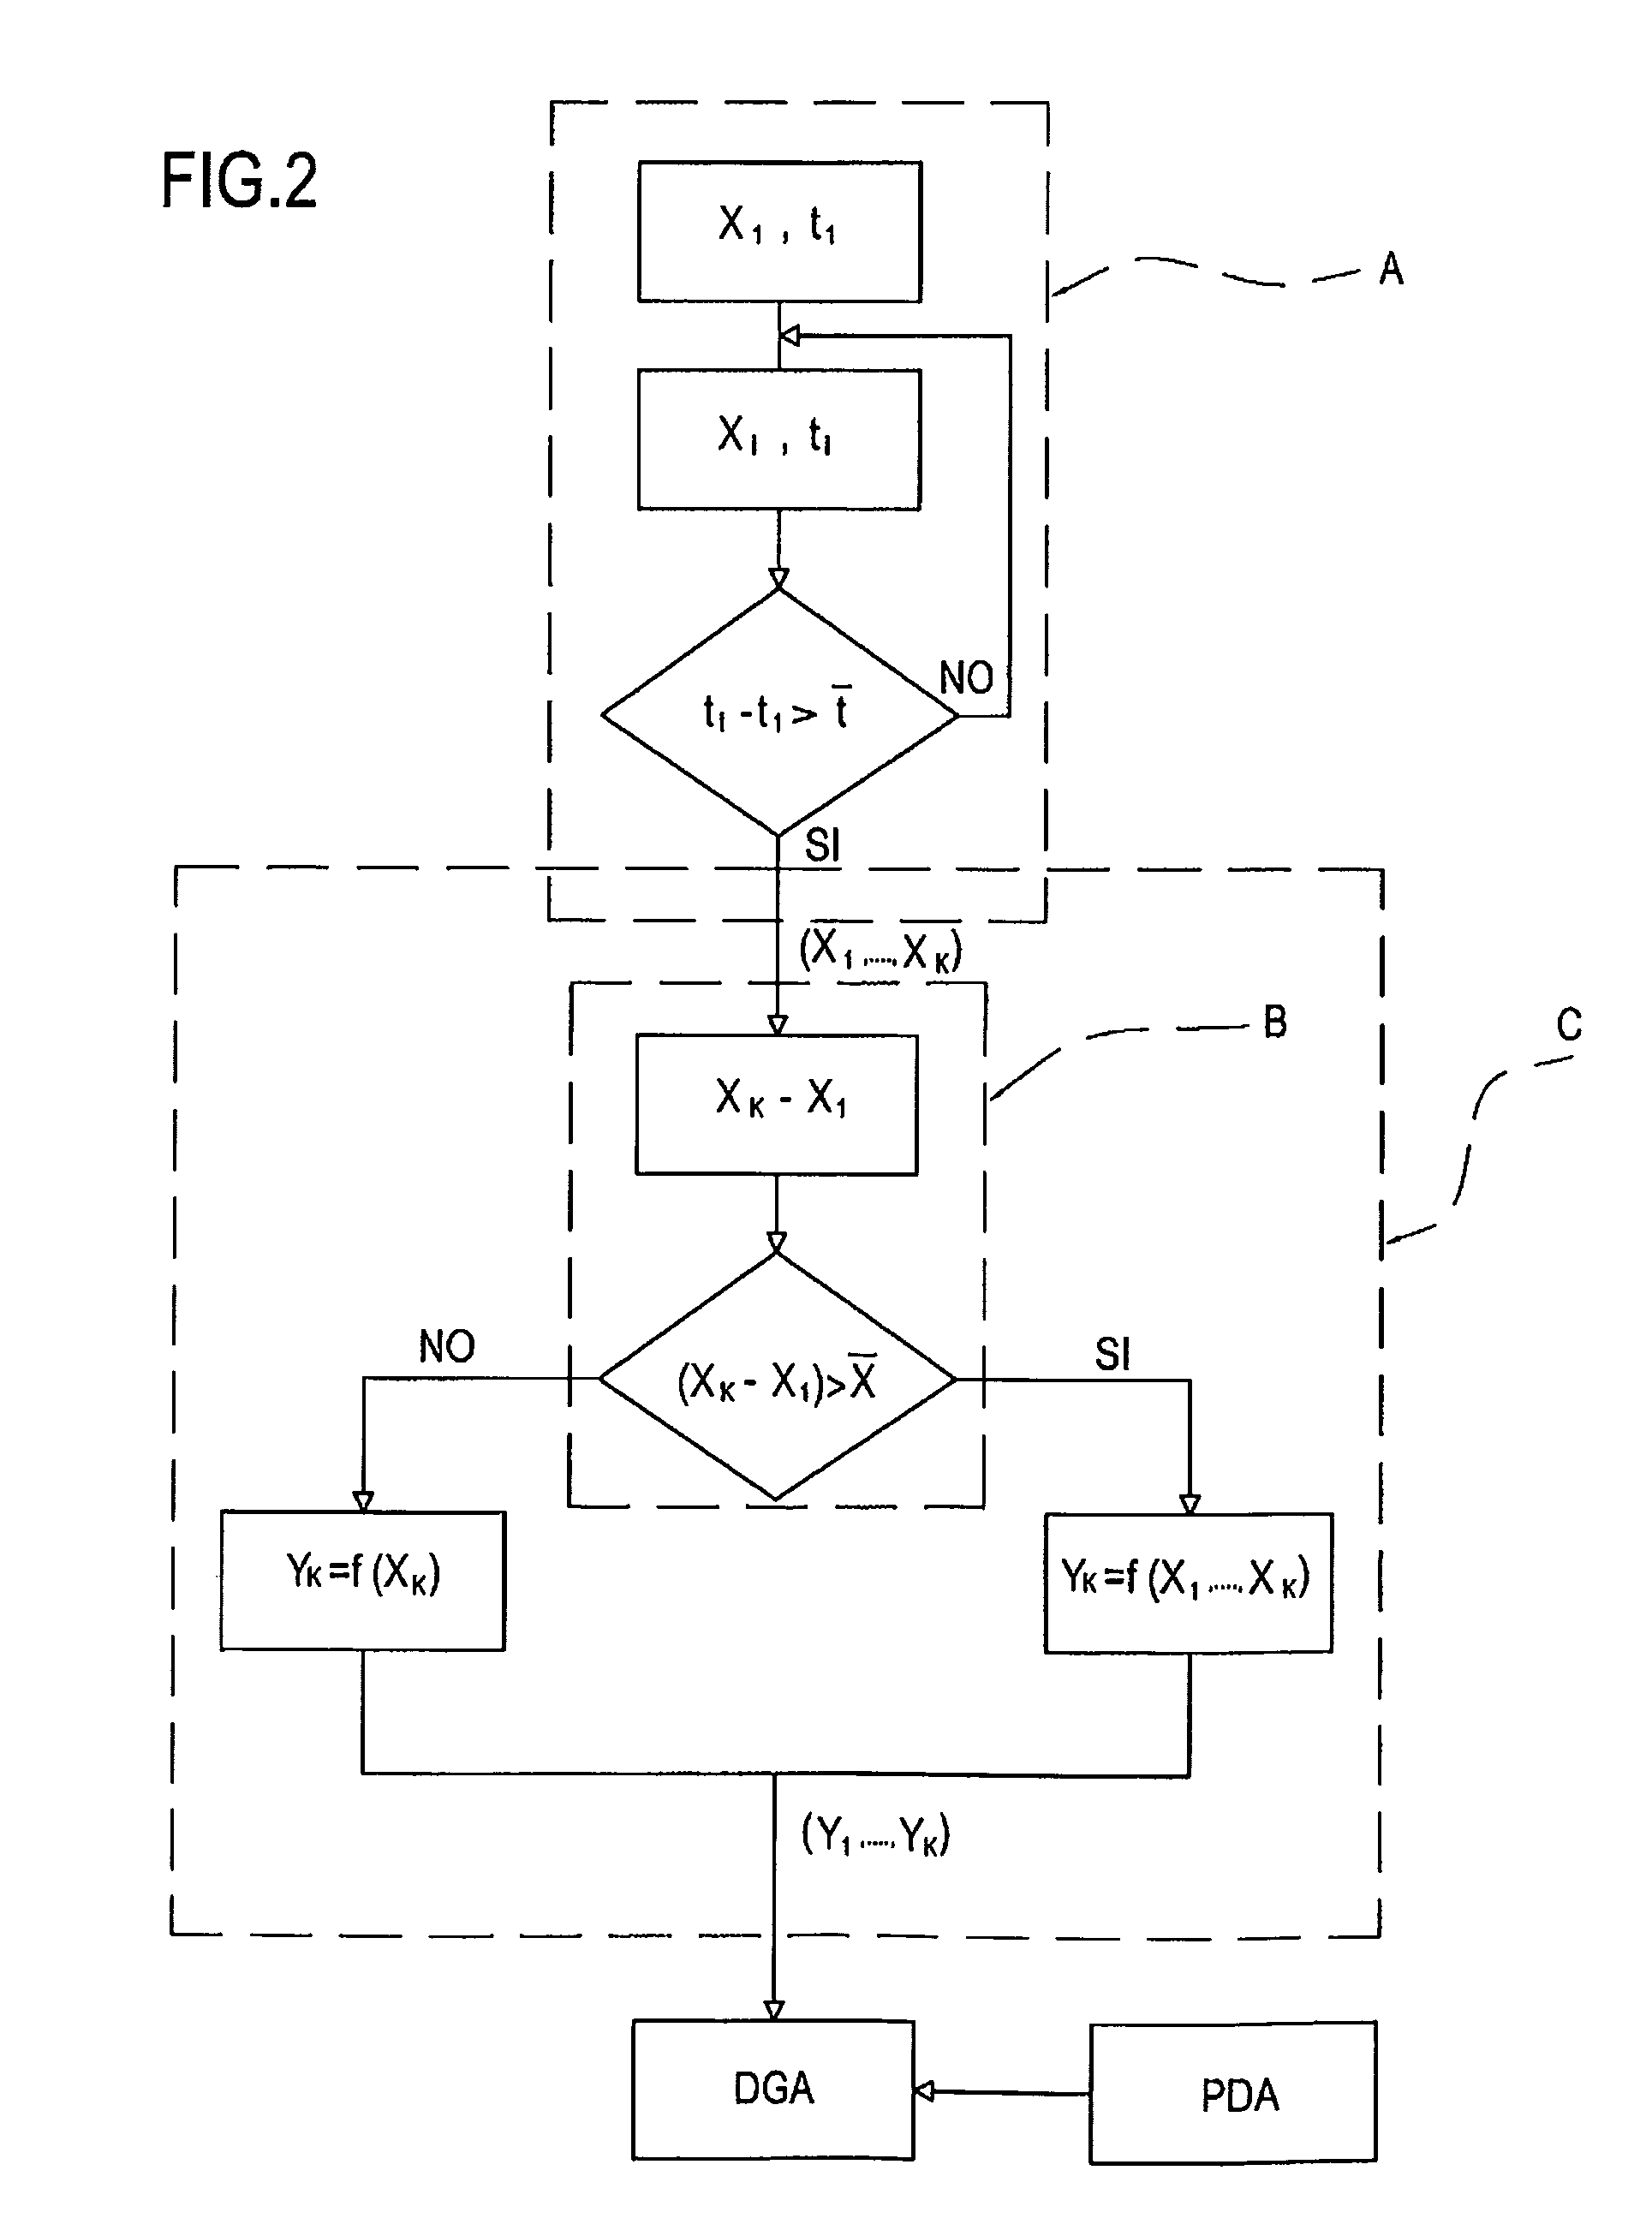 Method and device for deriving the concentration of a gas dissolved in an electrical insulation oil